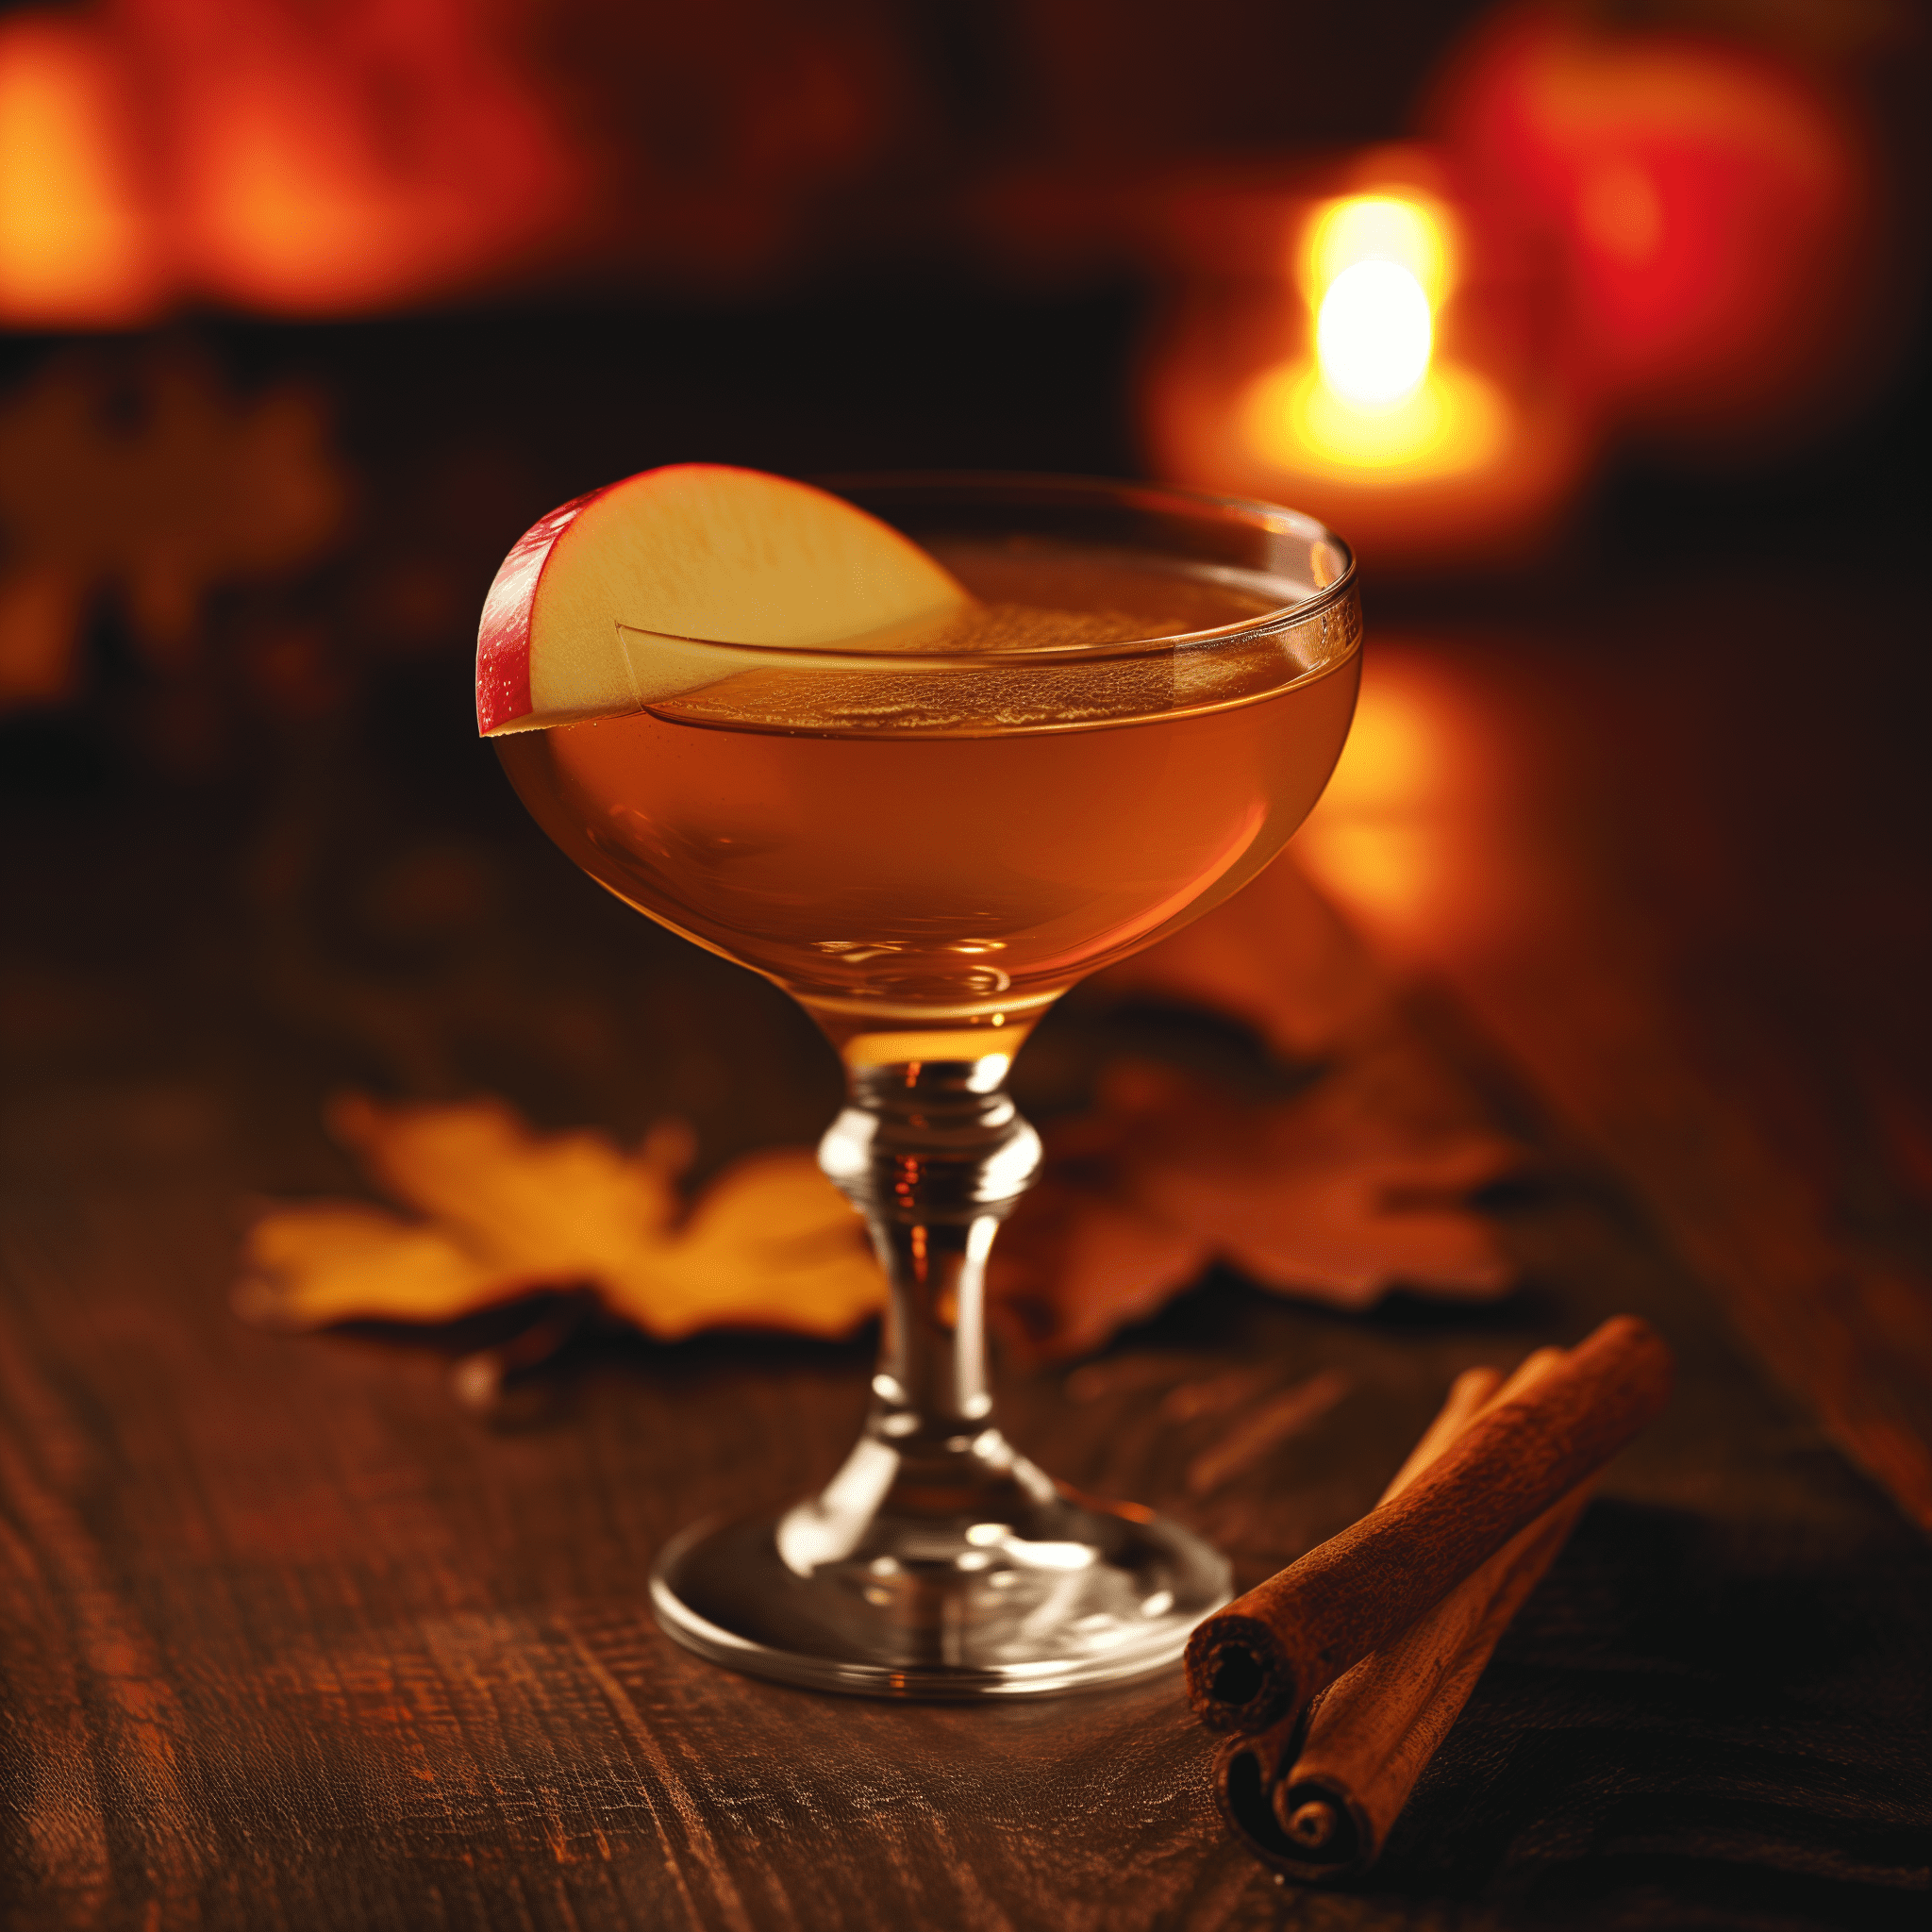 Fall From The Tree Cocktail Recipe - The 'Fall From The Tree' cocktail offers a harmonious blend of flavors. It's warmly sweet from the apple juice and cinnamon syrup, with a refreshing tartness from the lemon juice. The applejack, or your choice of bourbon or scotch, provides a robust backbone, while the aromatic bitters add depth and complexity. It's a medium-bodied cocktail that leaves a lingering spice on the palate.